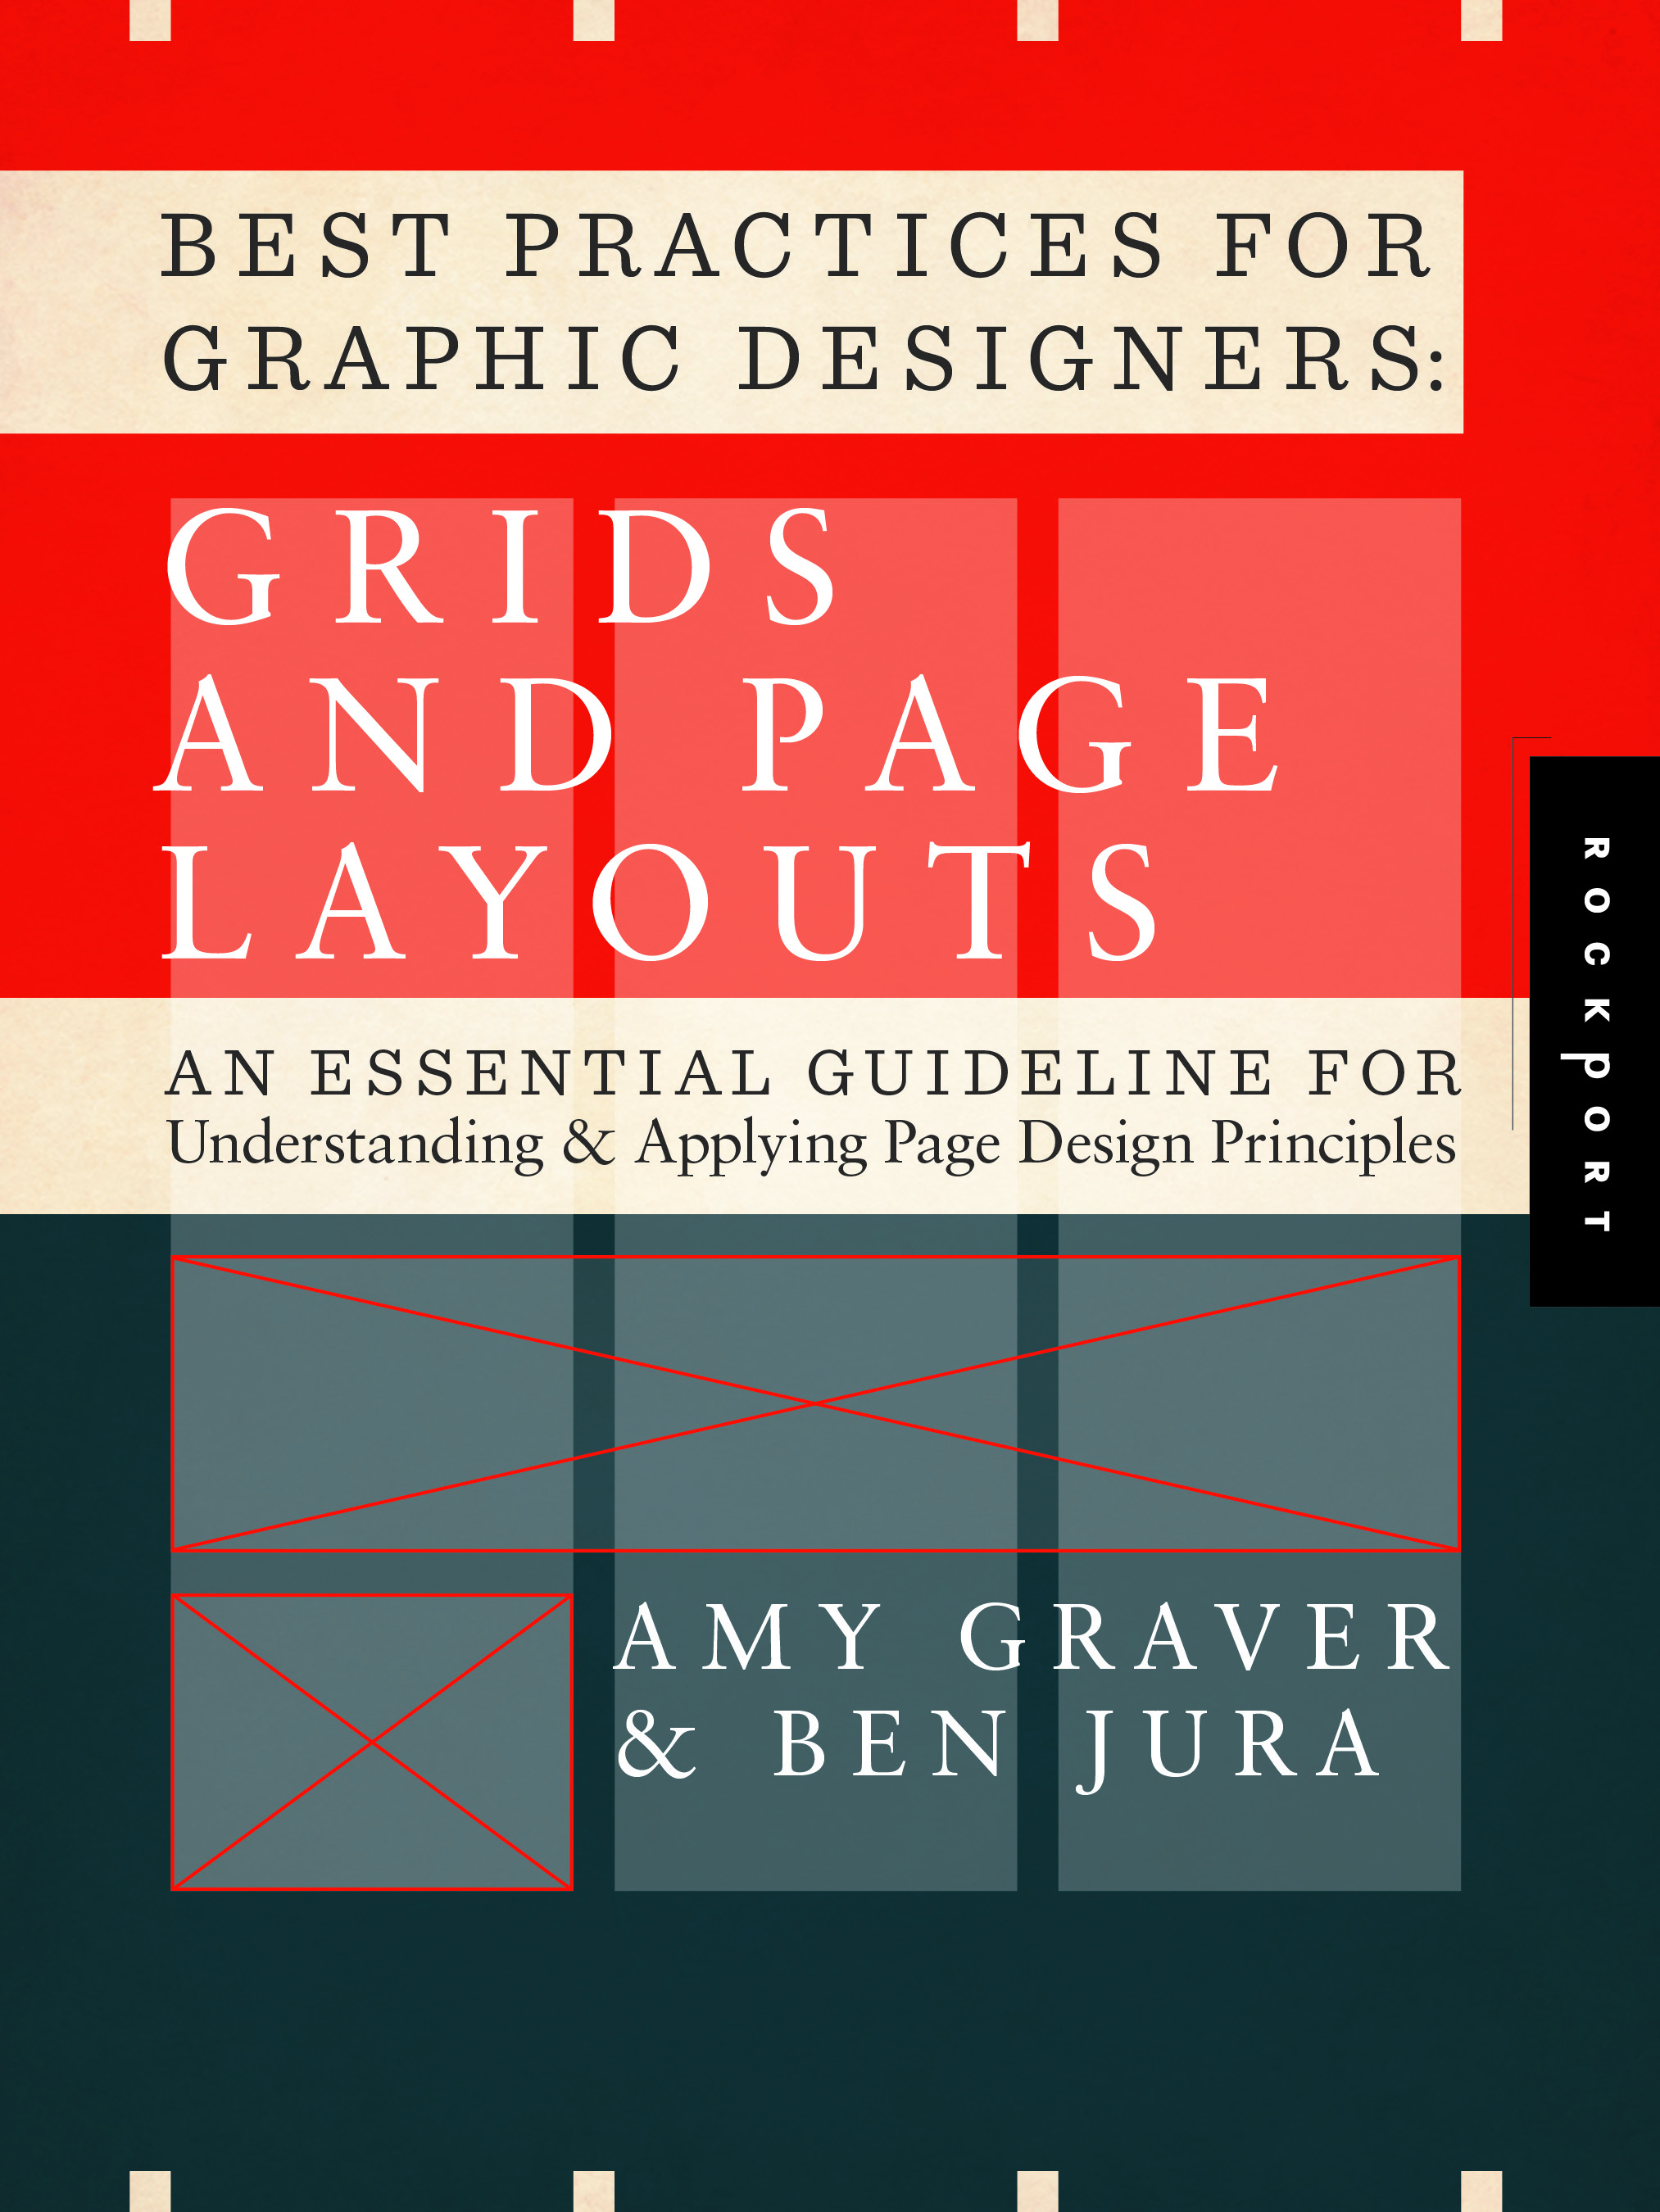 Layout Essentials 100 Design Principles For Using Grids Free Pdf